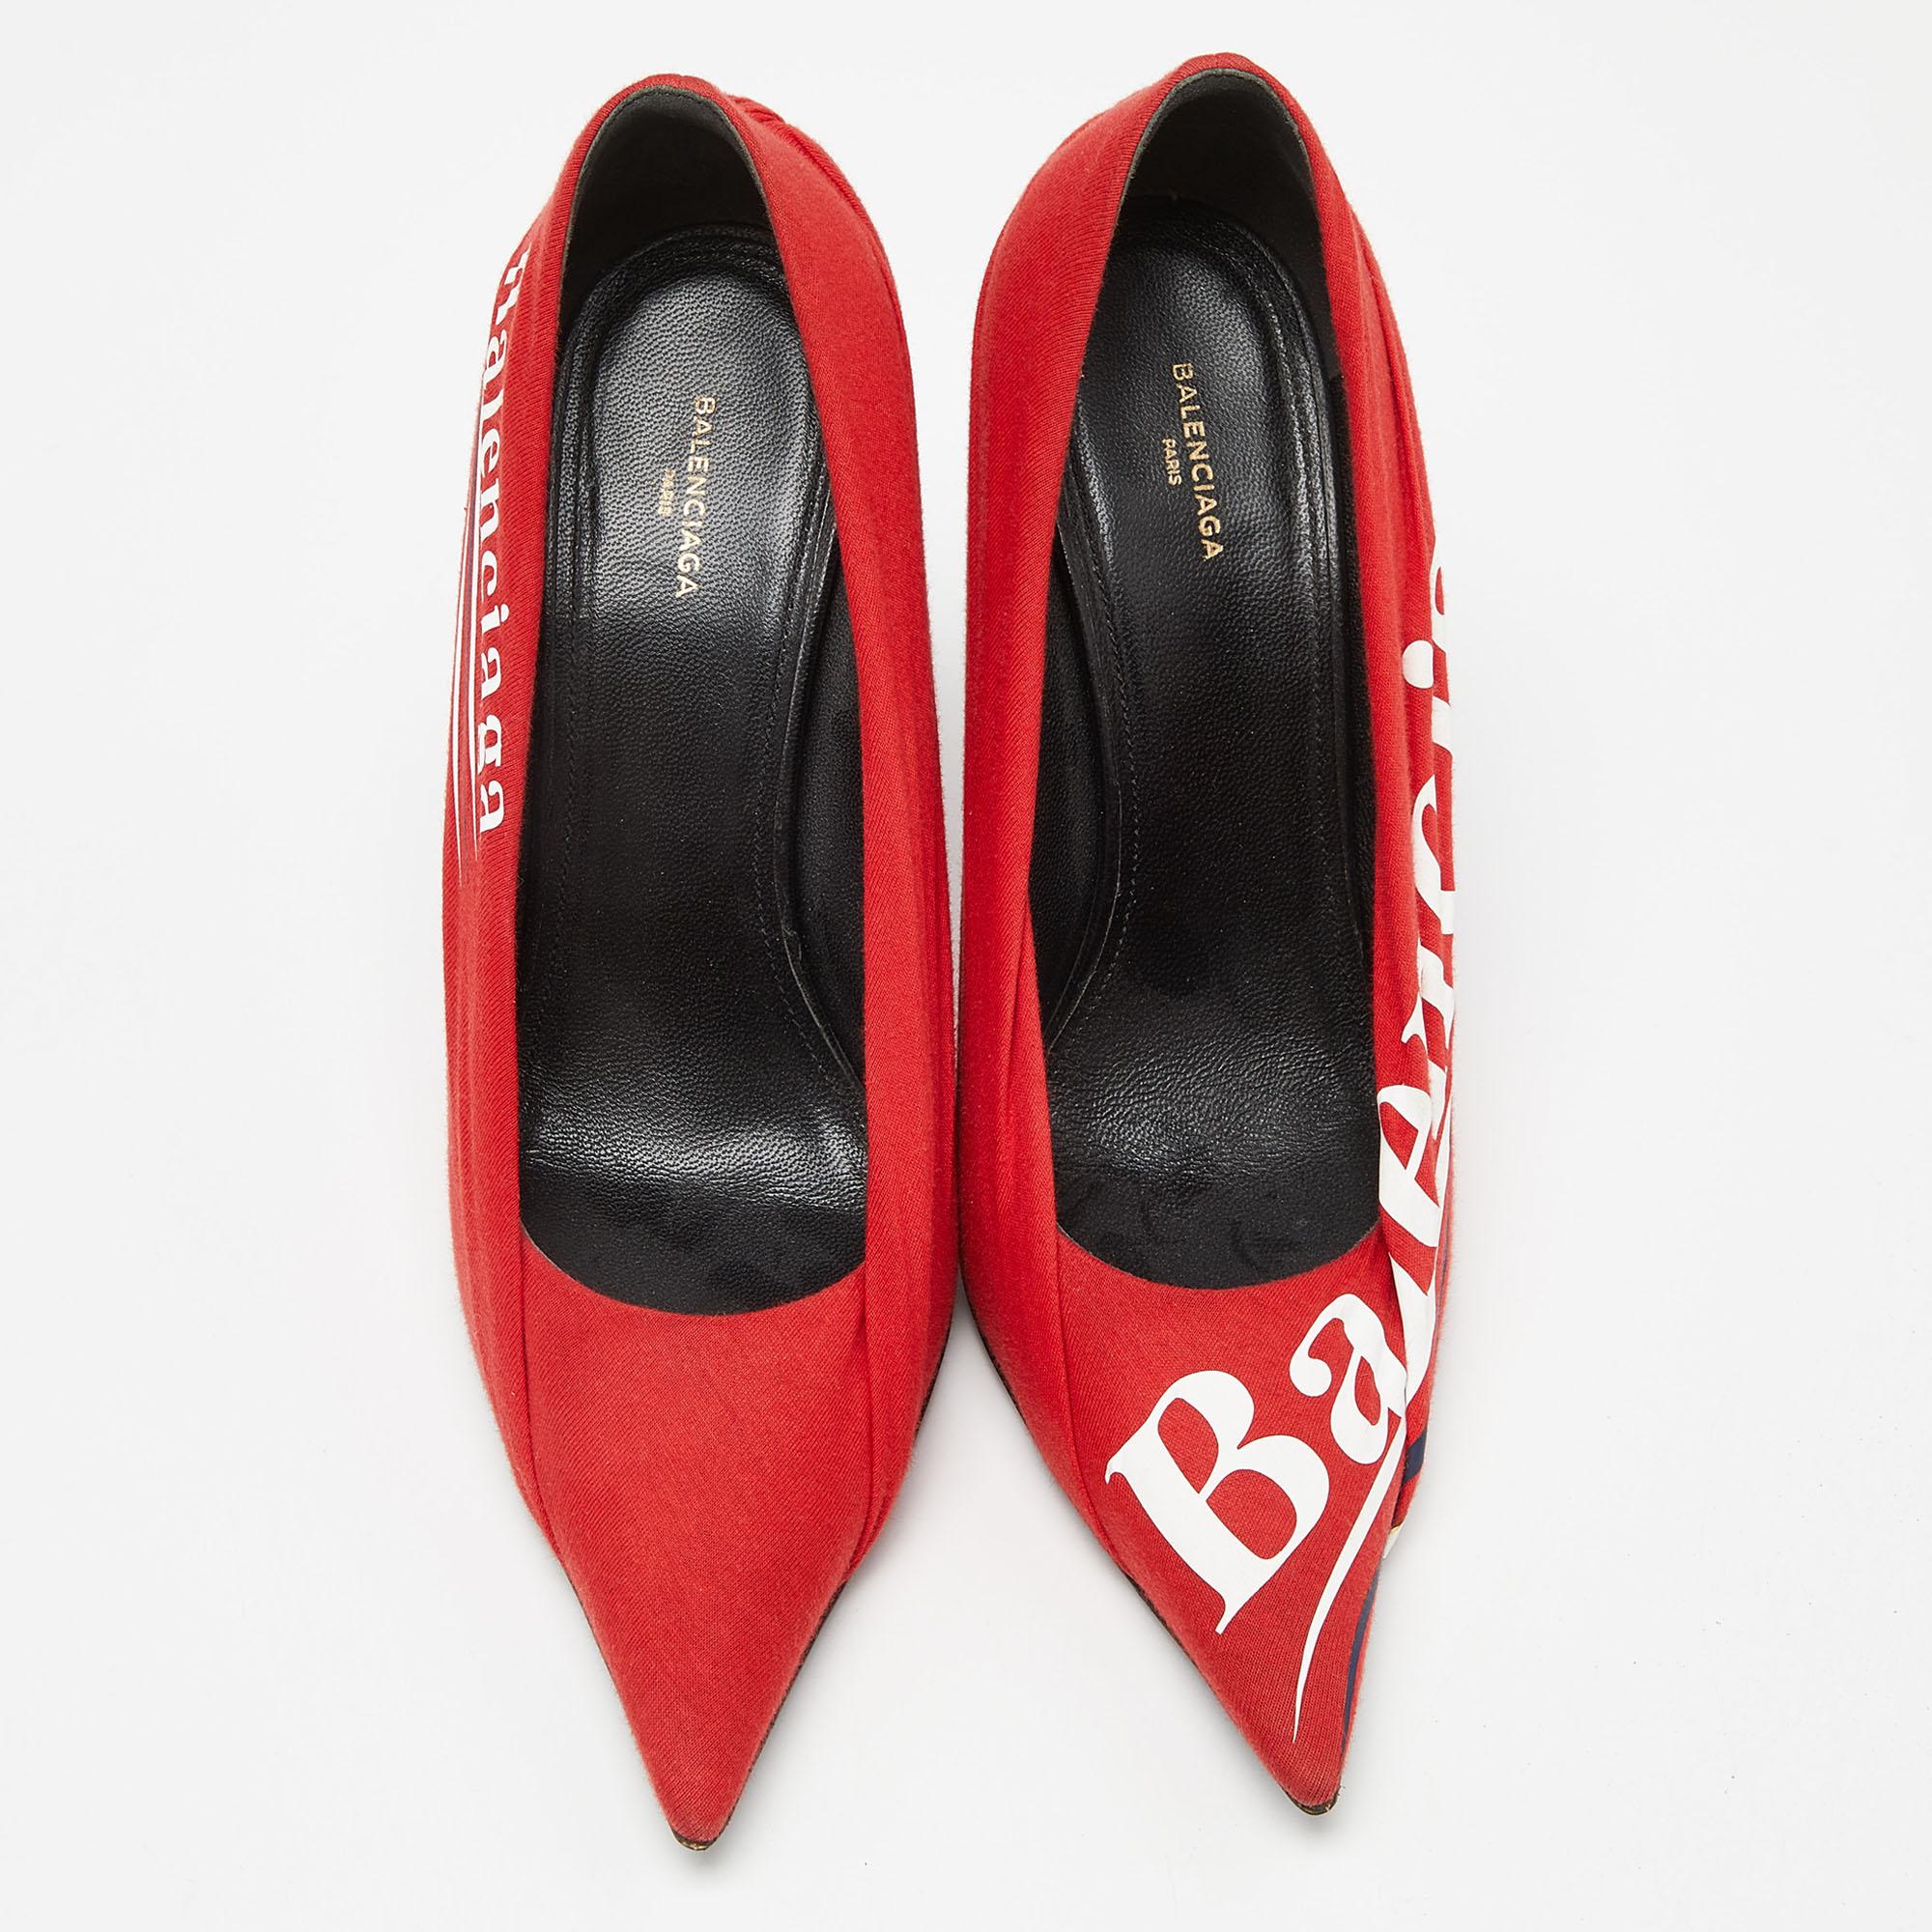 Balenciaga Red Fabric And Leather Knife Logo Pointed Toe Pumps Size 38 In Good Condition For Sale In Dubai, Al Qouz 2